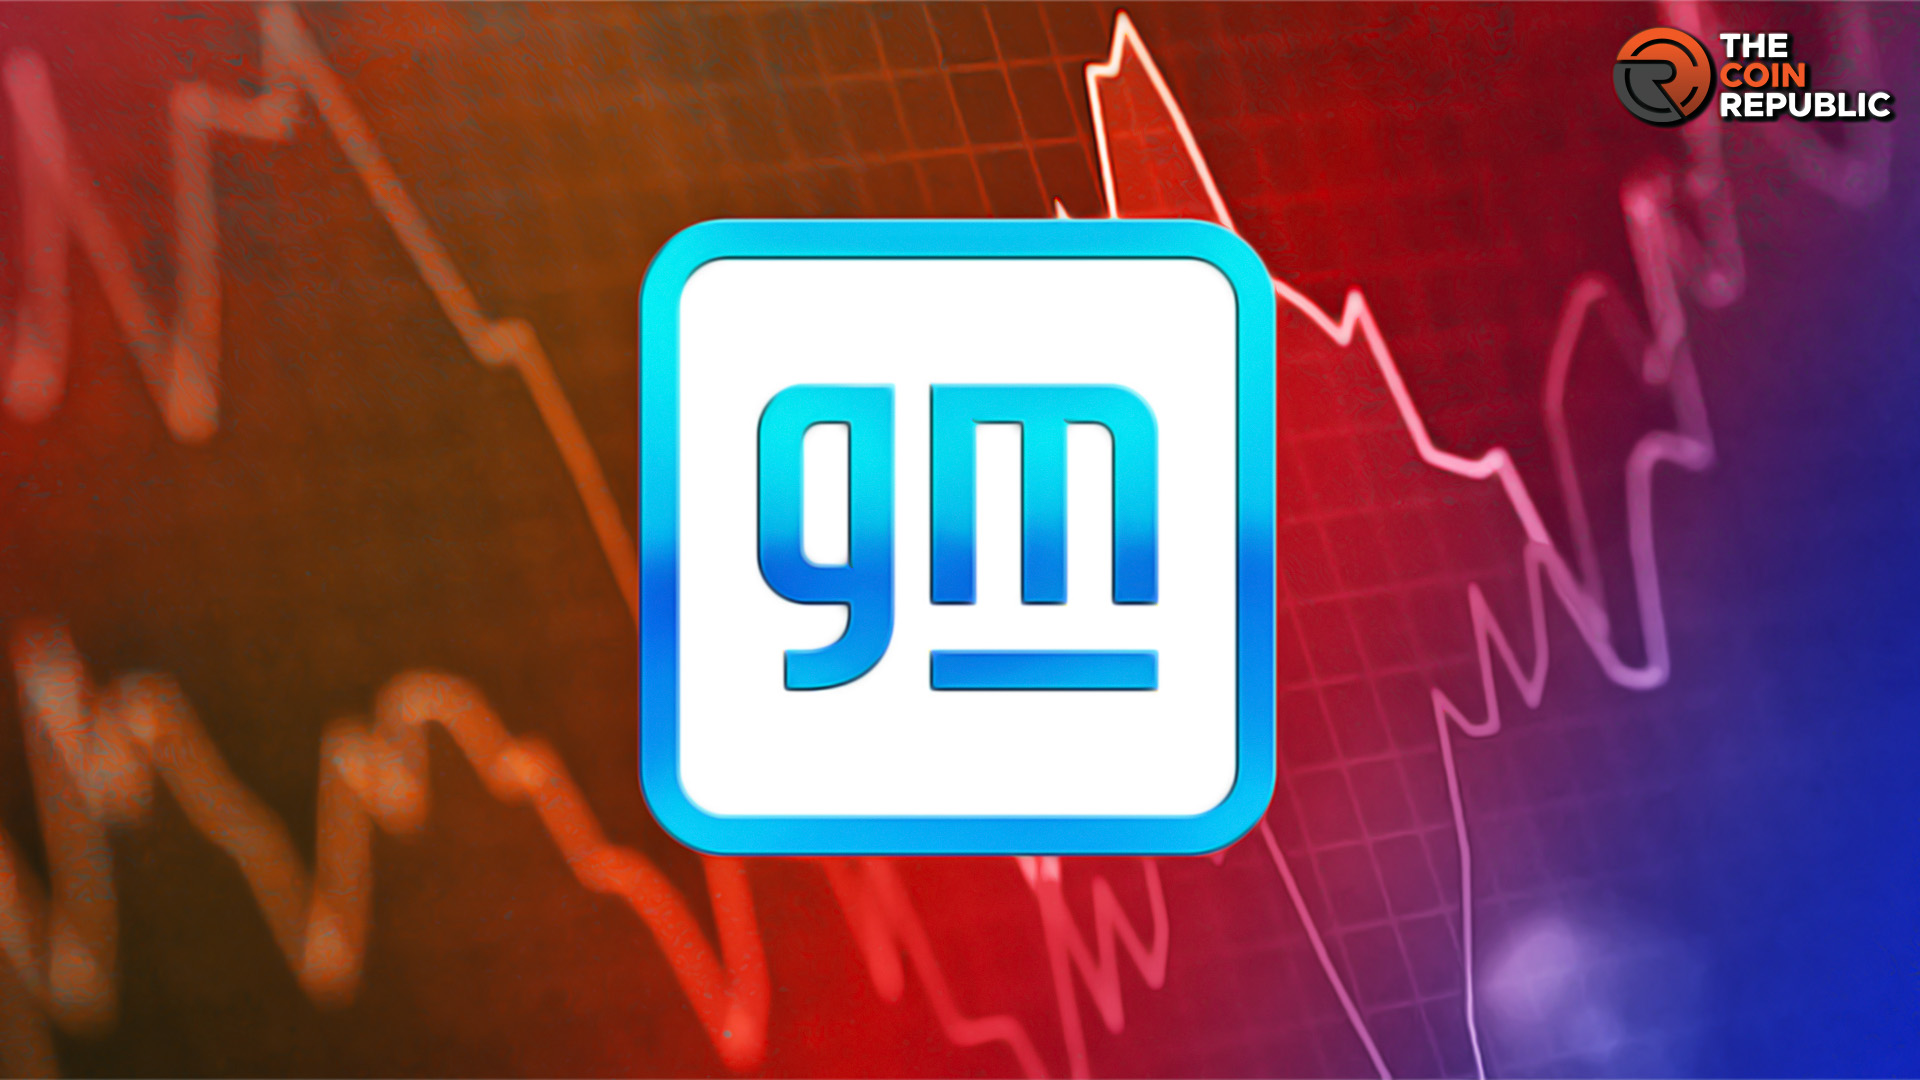 GM Stock: Will General Motors Stock Reach the $40 Level?